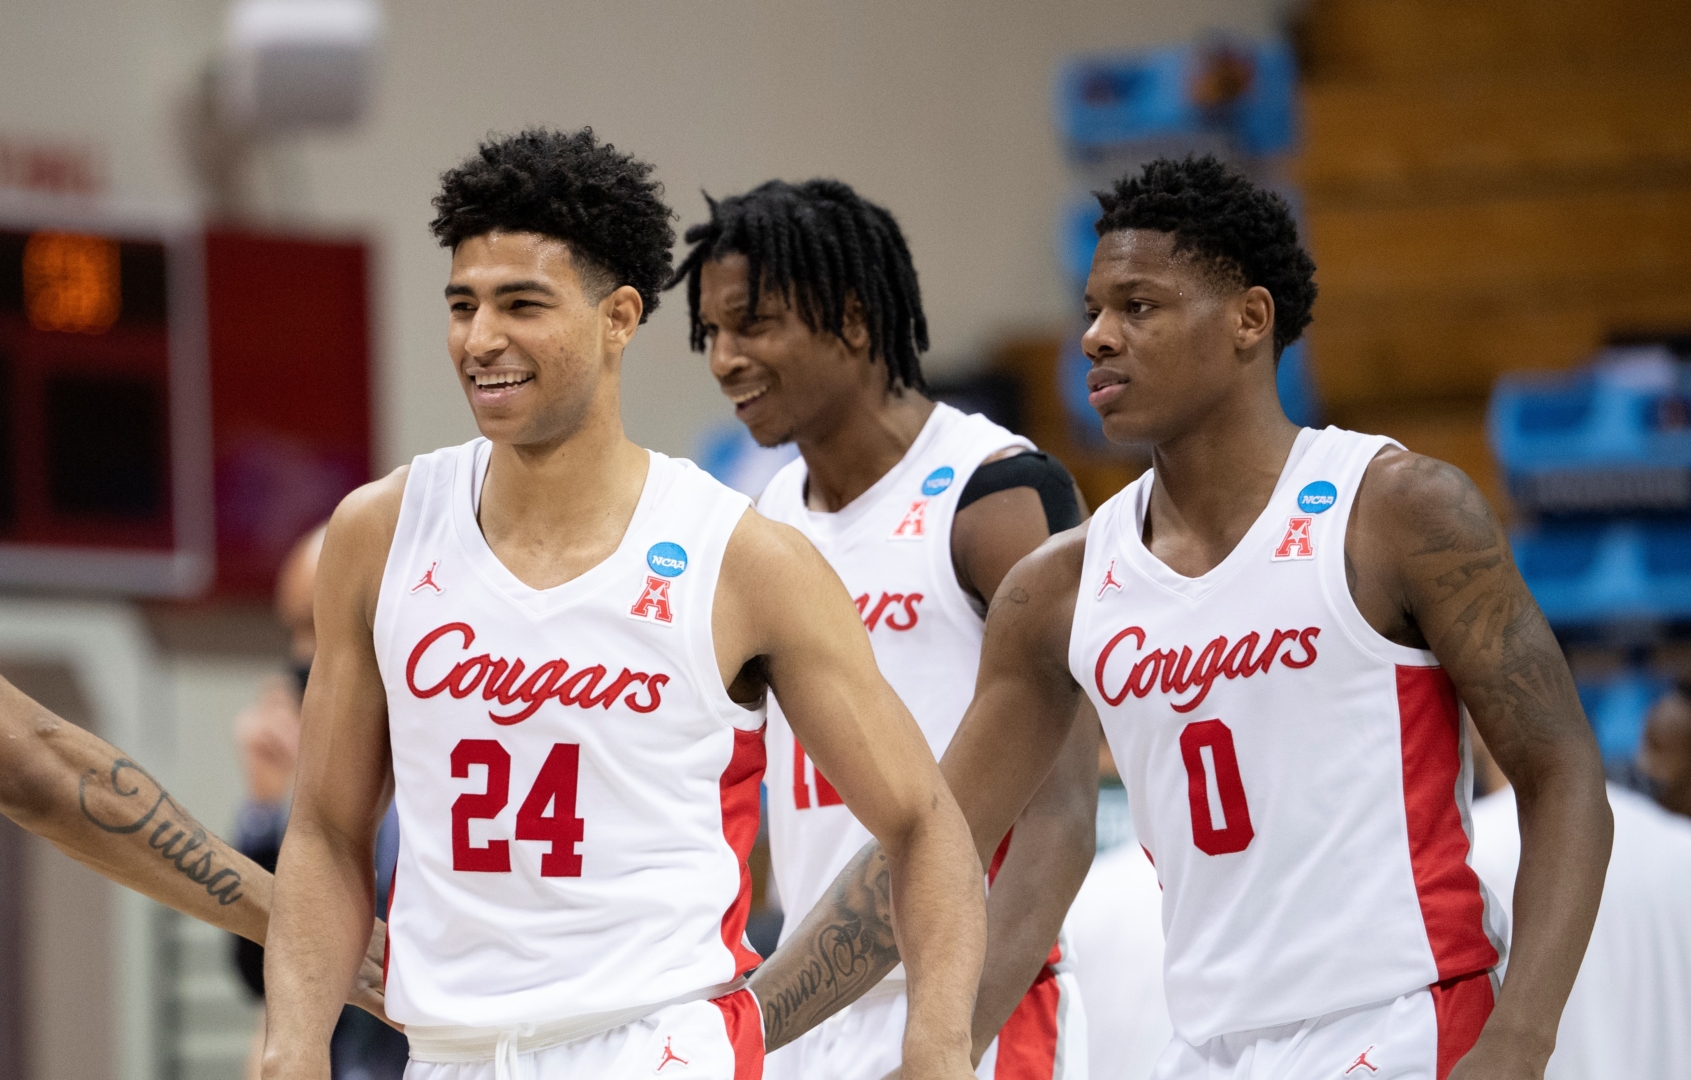 Quentin Grimes (24) of the Houston Cougars reacts during the first round of the 2021 NCAA Division I Men’s Basketball Tournament against Cleveland State Vikings held at Simon Skjodt Assembly Hall on March 19, 2021 in Bloomington, Indiana. Quentin Grimes led the team in scoring. | Photo by Ben Solomon/NCAA Photos via Getty Images